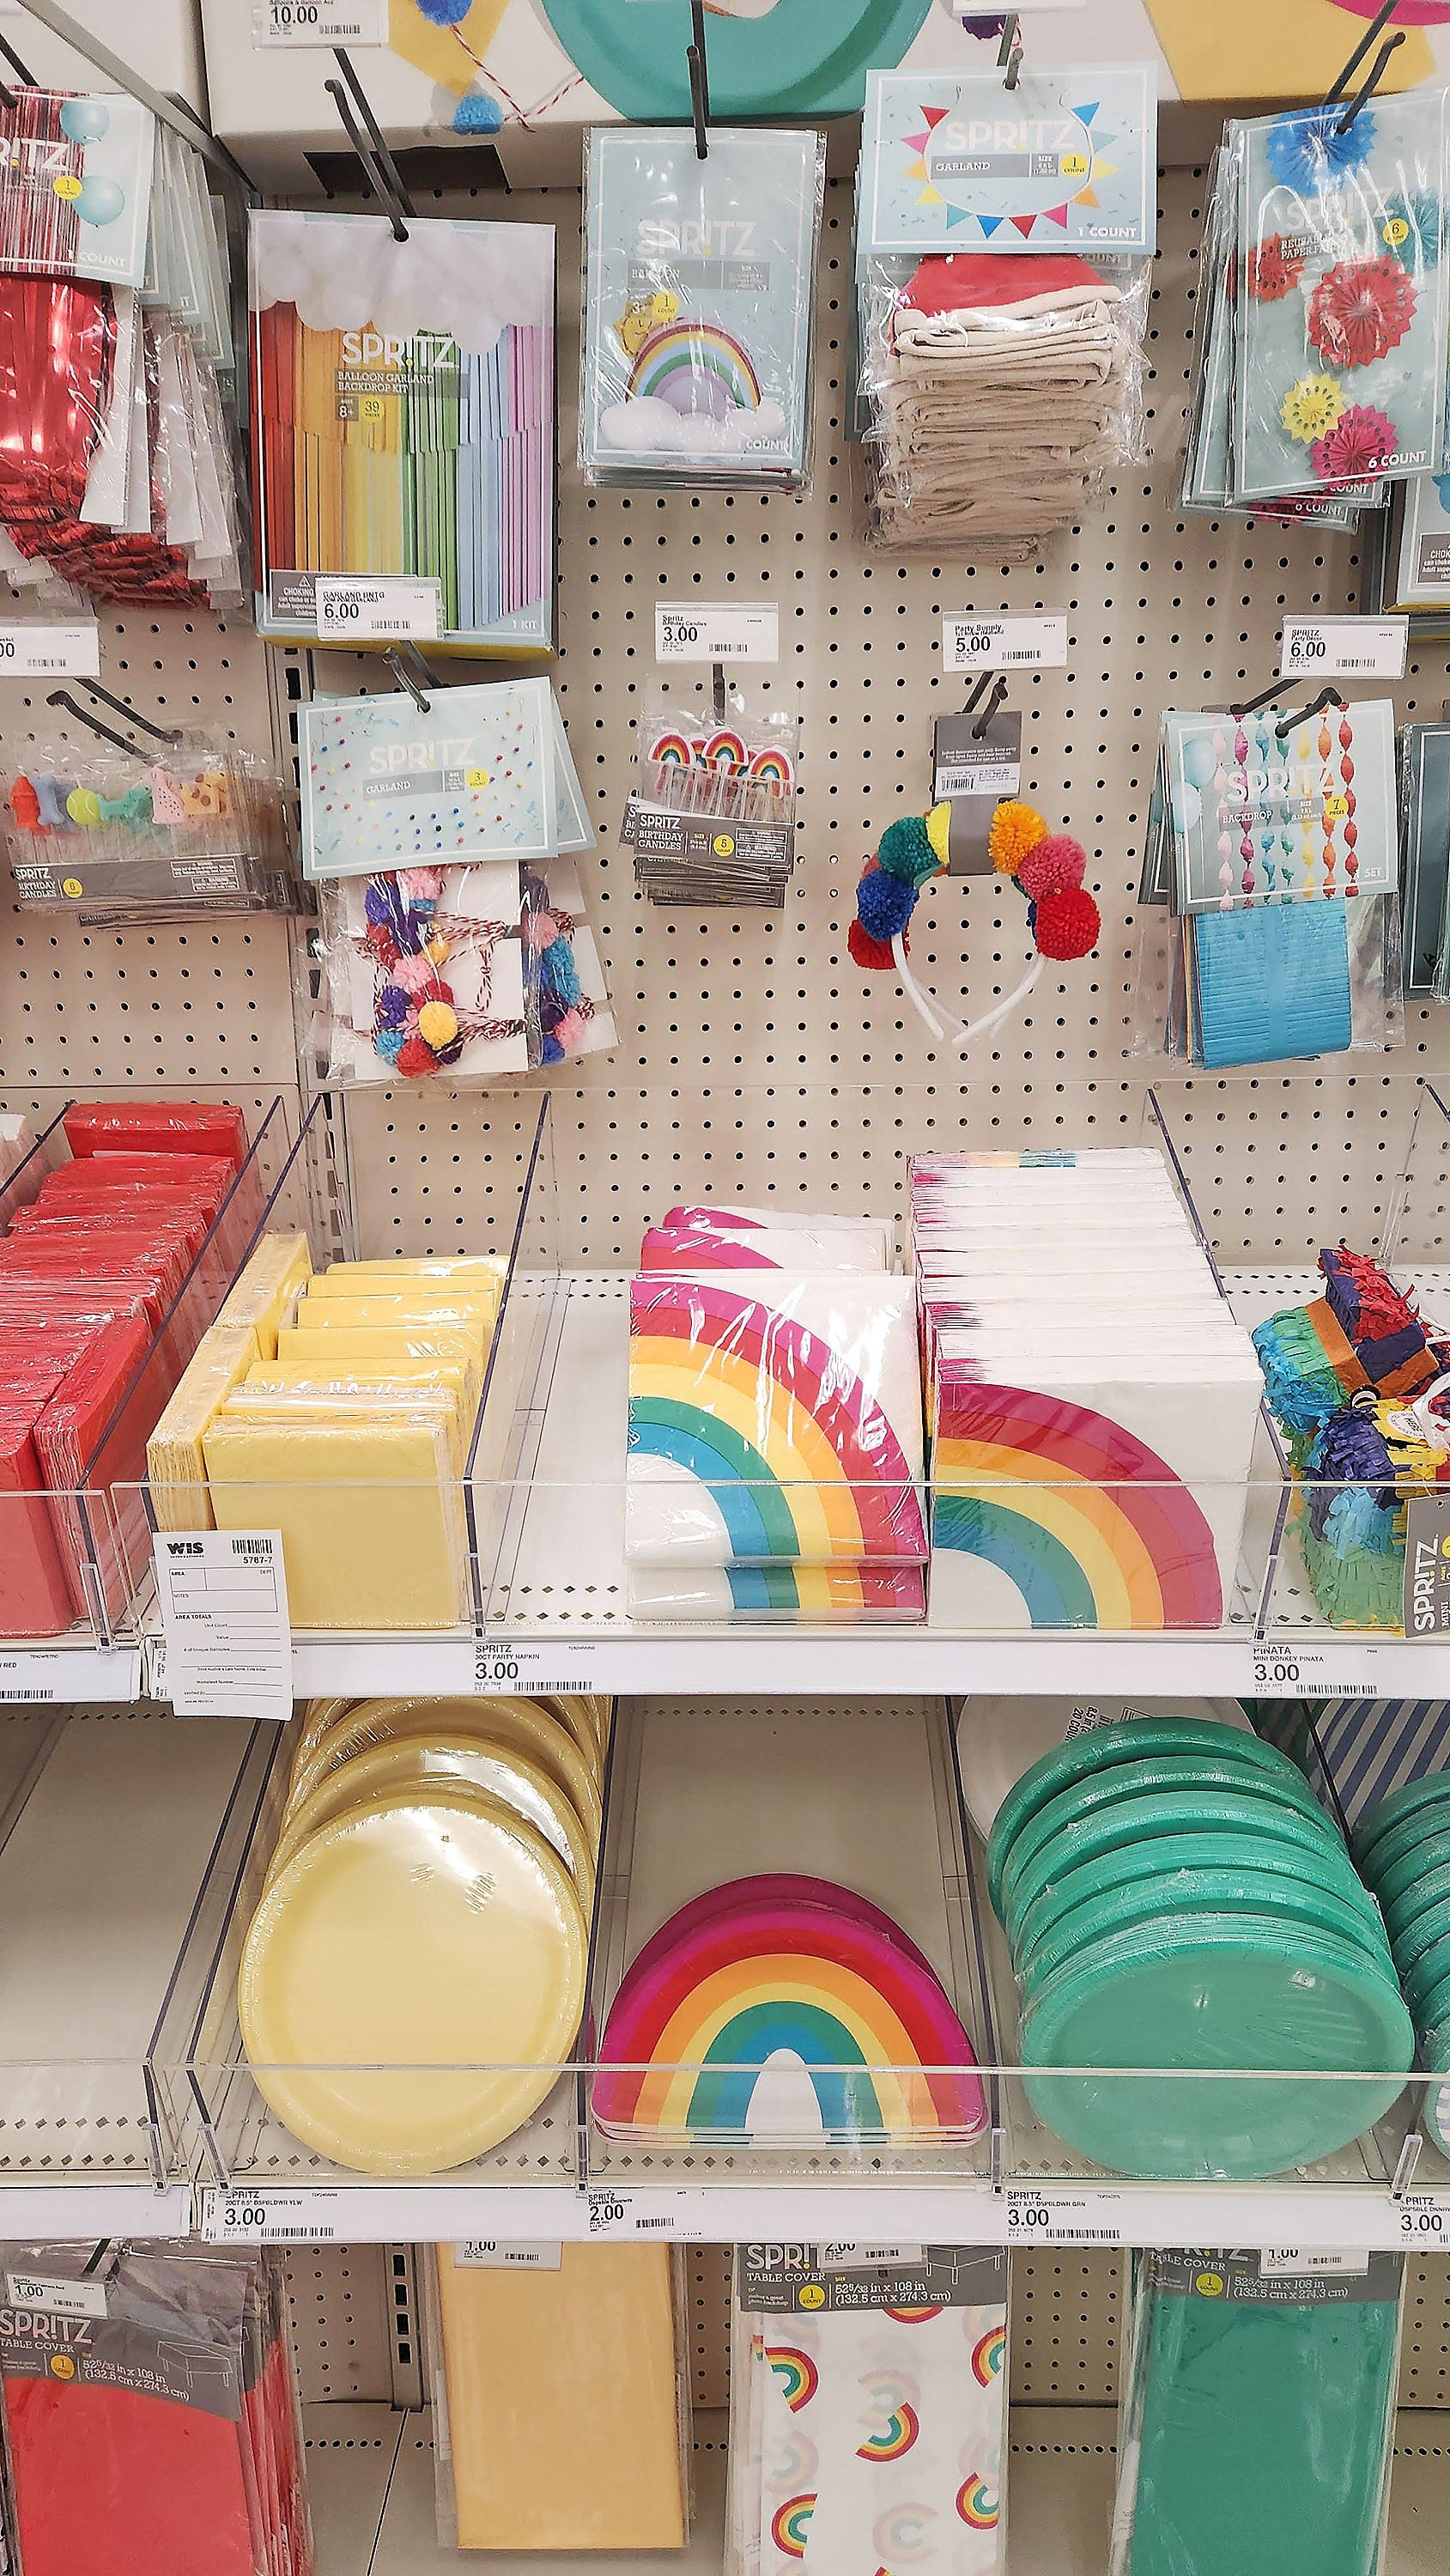 Target has cut back where it sells Pride Month merchandise. Columbia is likely included